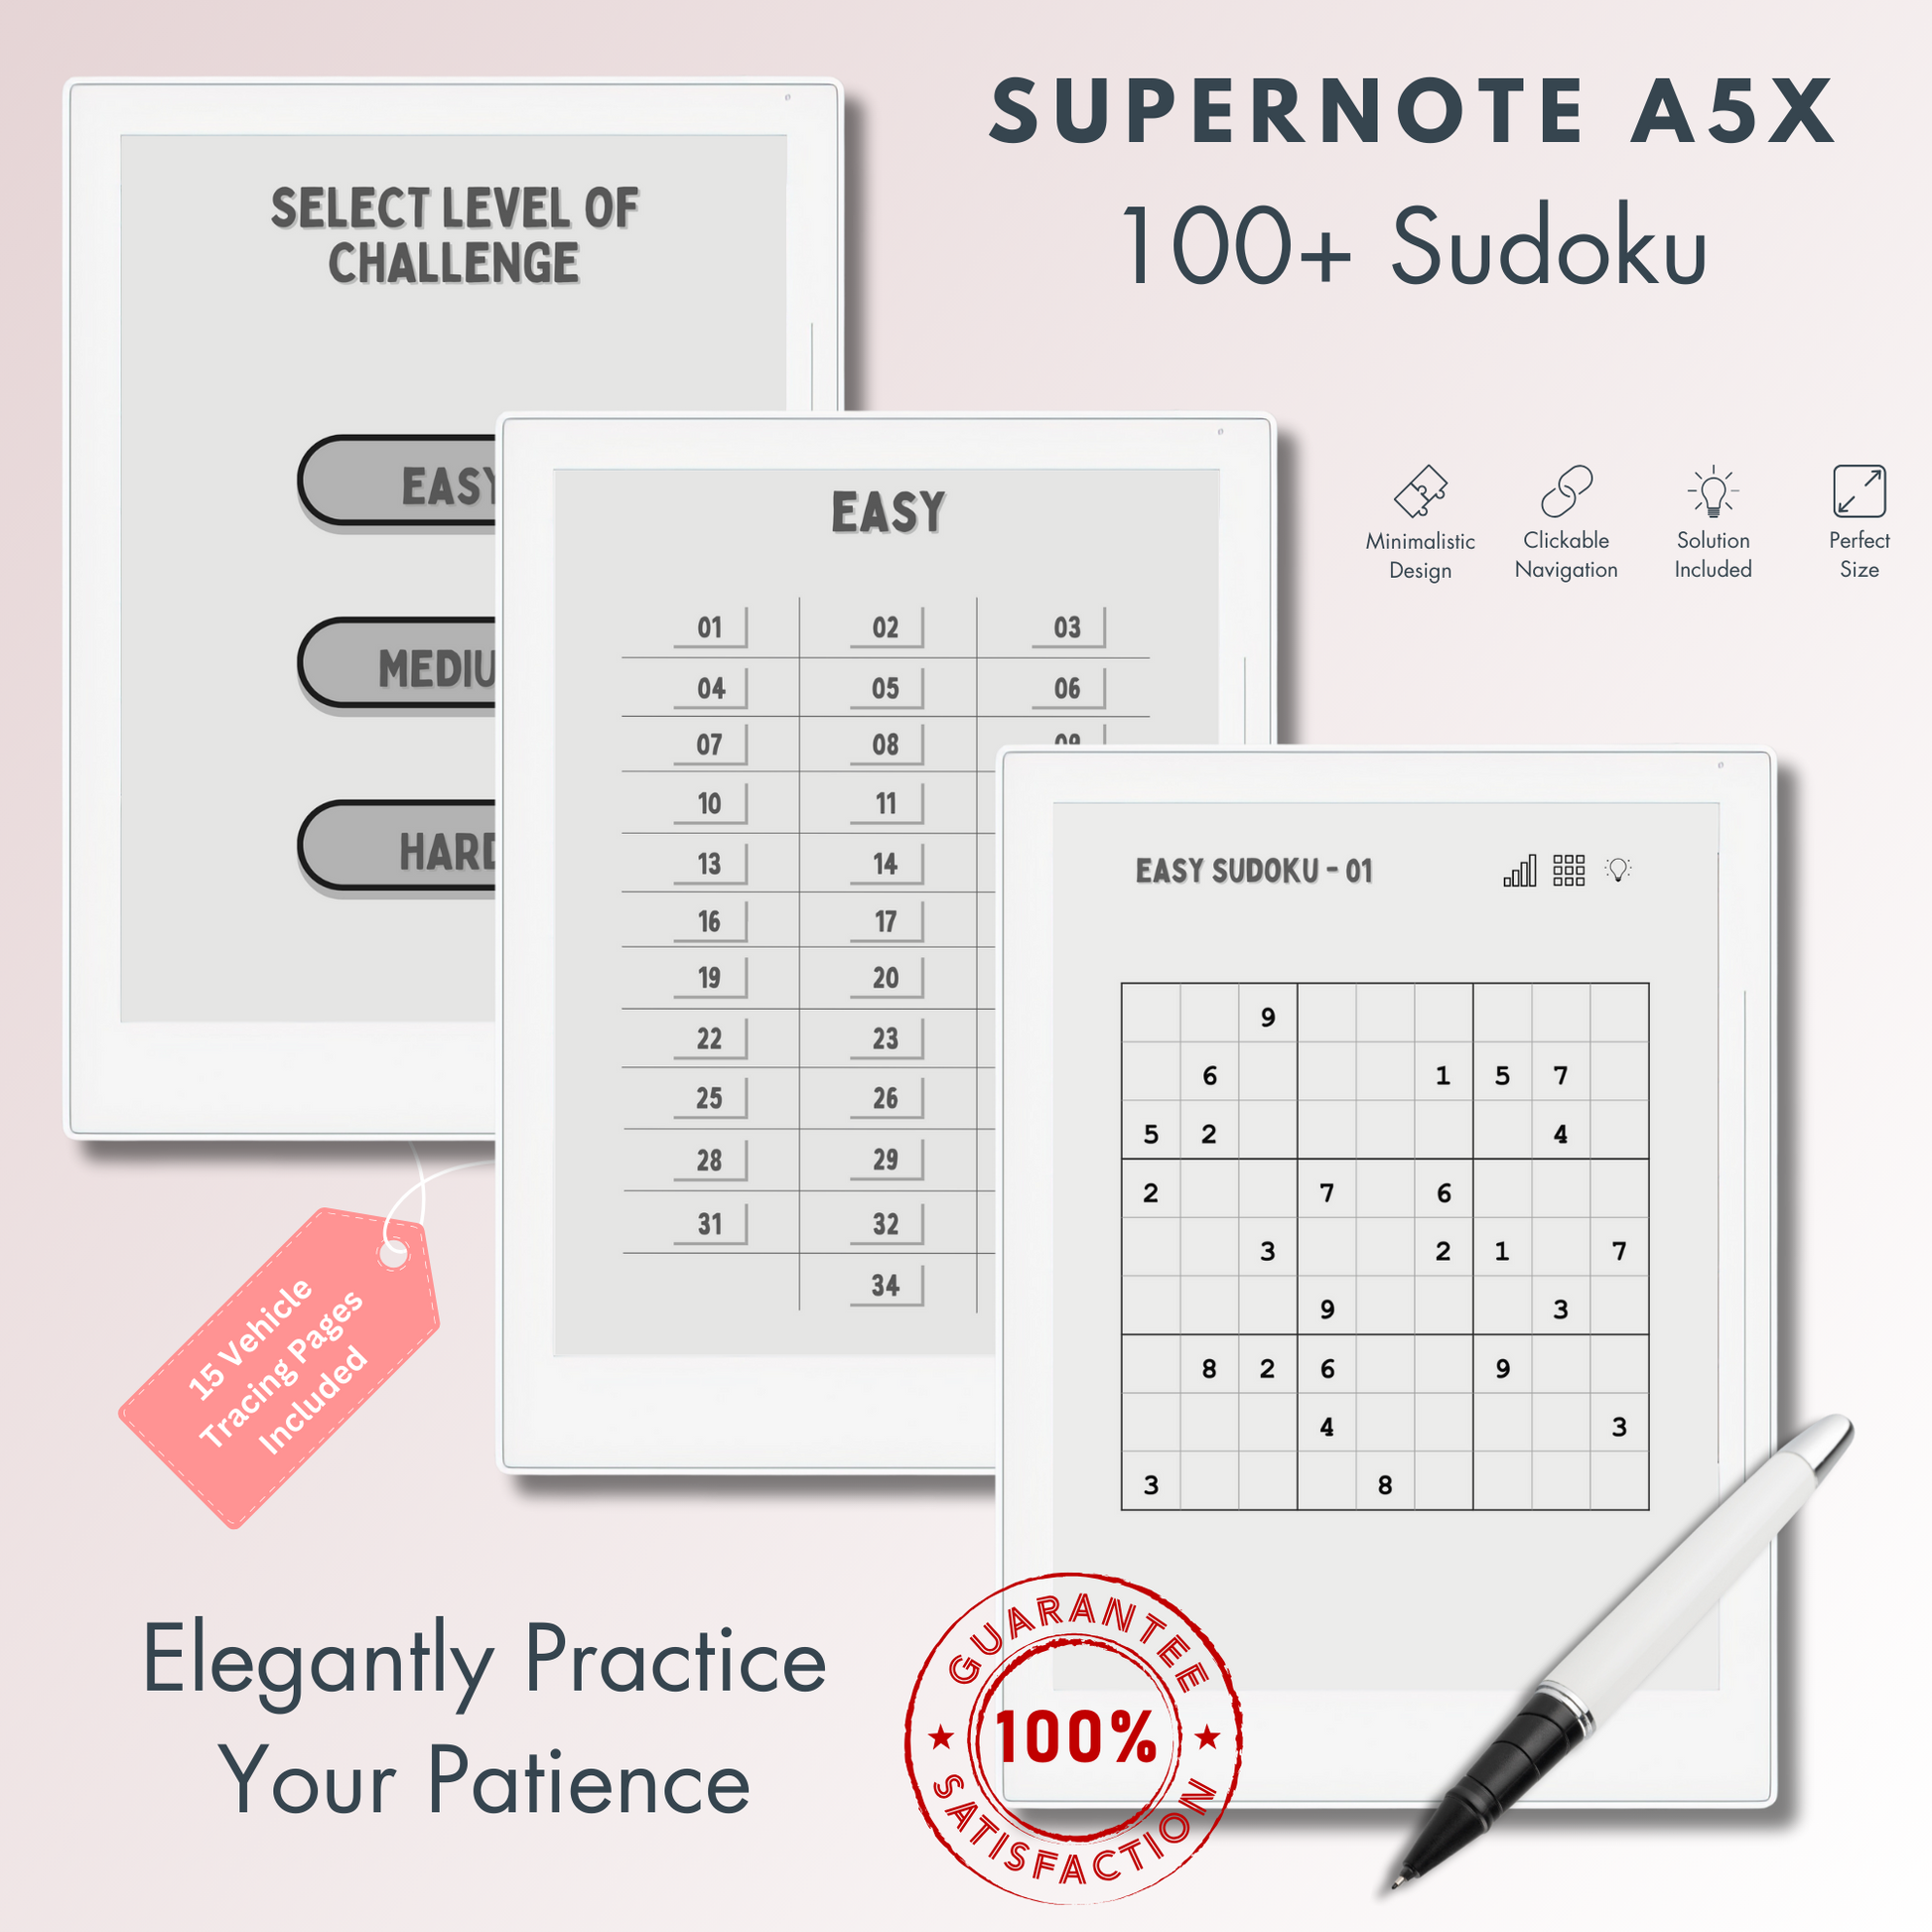 This is a Digital Download of 100+ Sudoku Puzzles in 3 different levels tailored for Supernote A5X and A6X. Compatible with Supernote A5X and A6X.